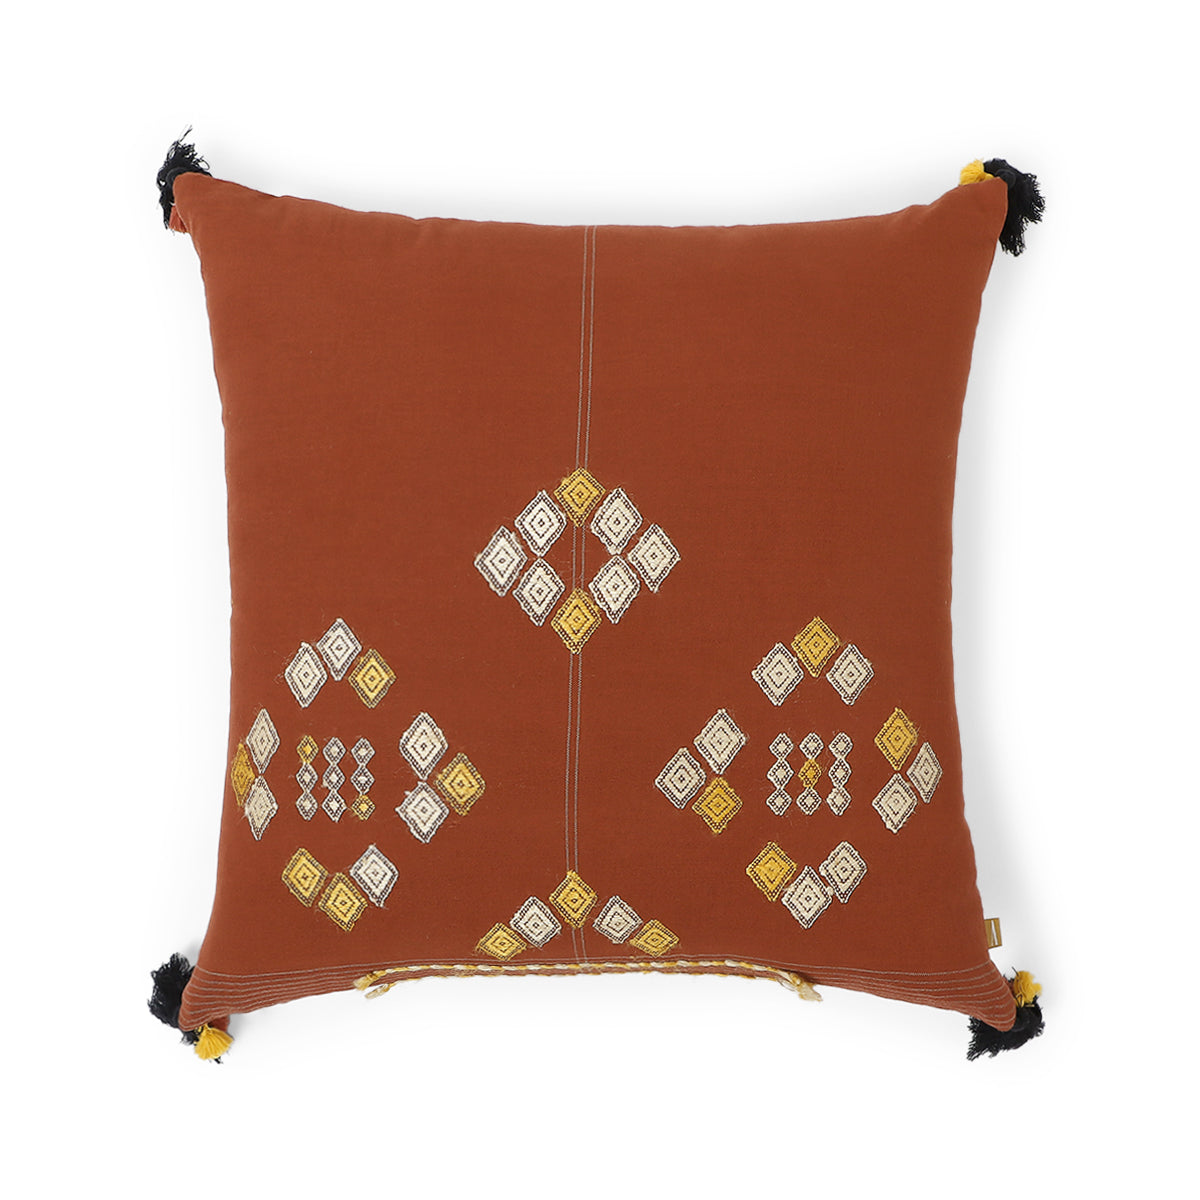 Lopa Extra Weft Cotton Cushion Cover